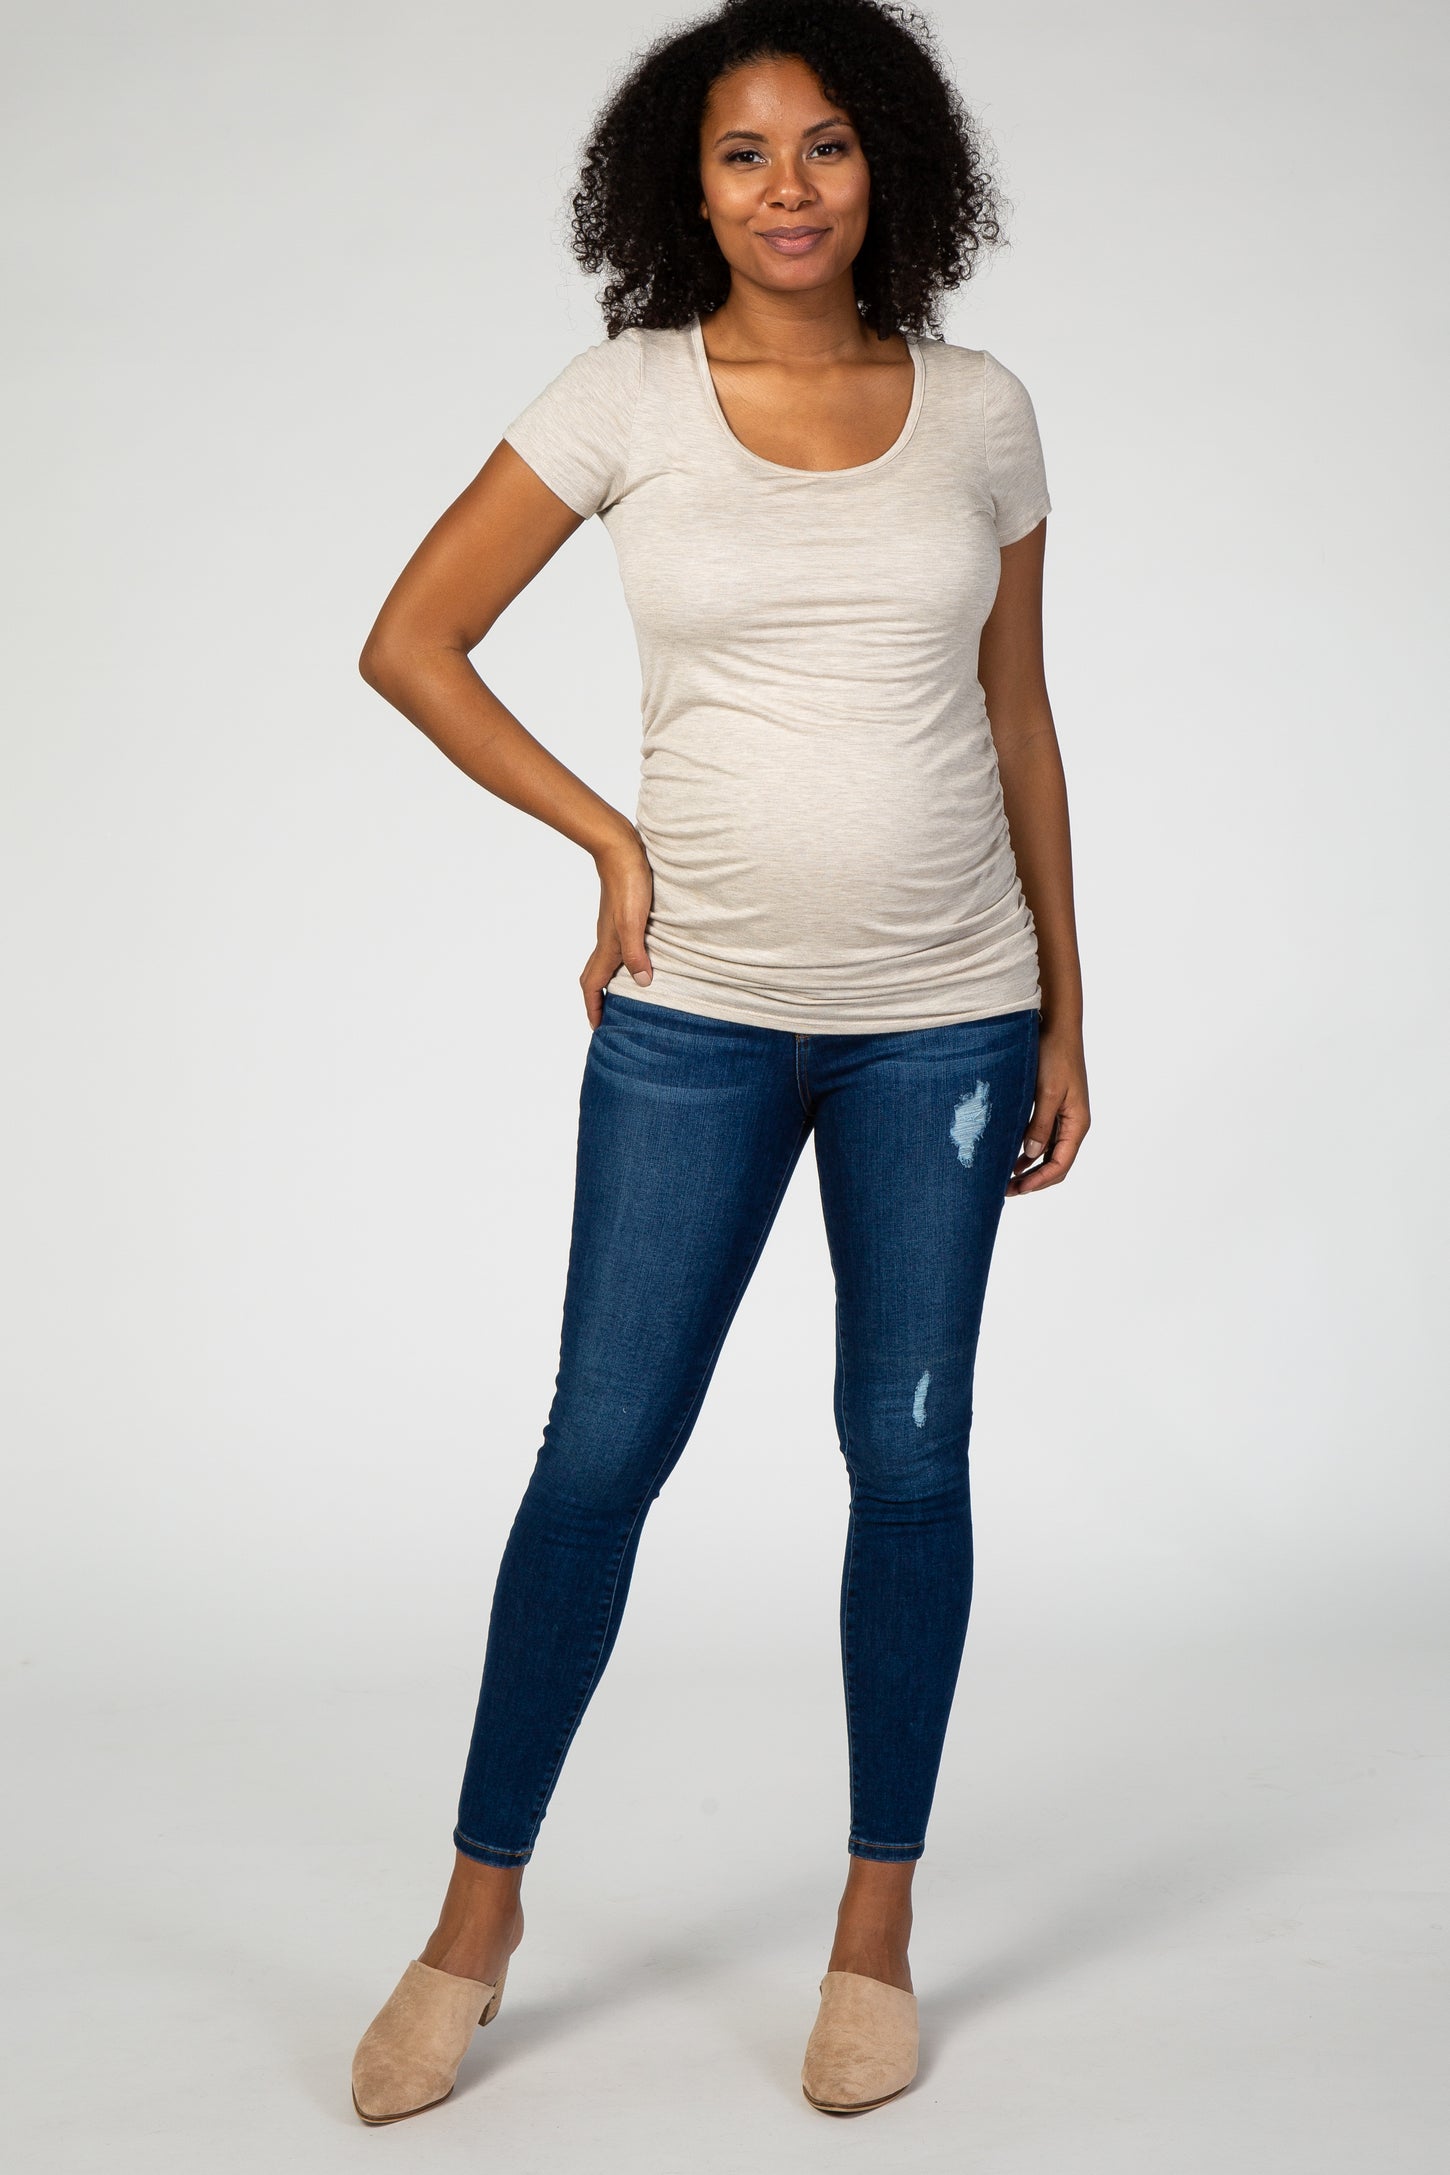 Navy Blue Lightly Distressed Skinny Fit Maternity Jeans